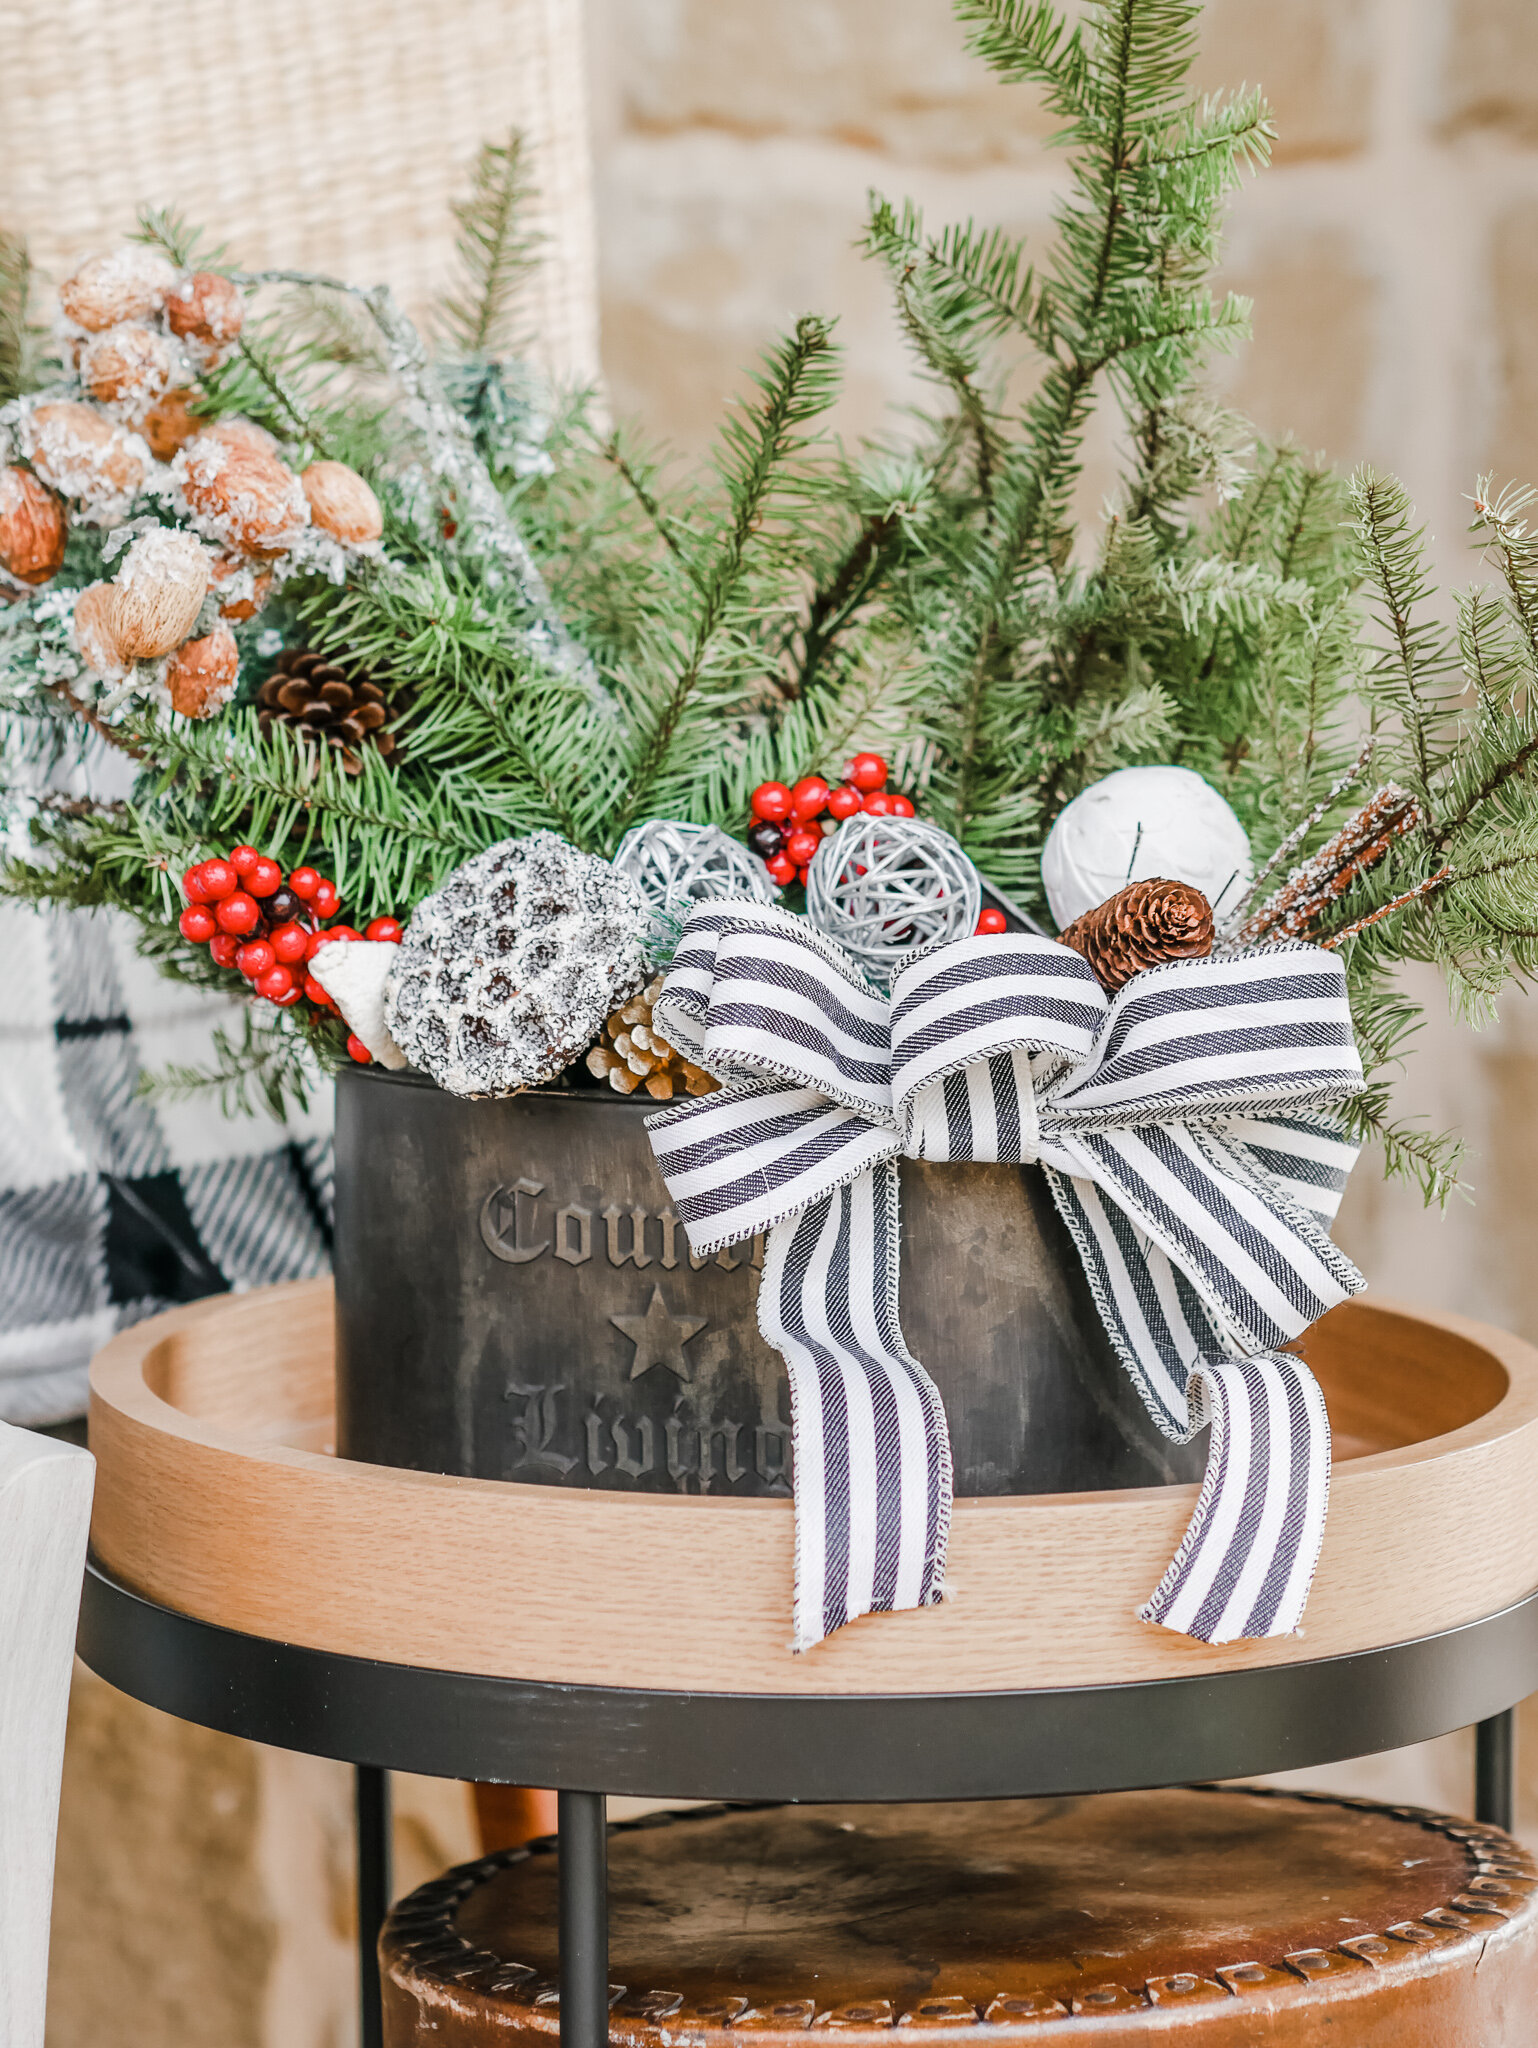 A modern farmhouse style Christmas porch designed by MINT Event Design in Austin, TX. Get more details and holiday decor ideas now at minteventdesign.com!